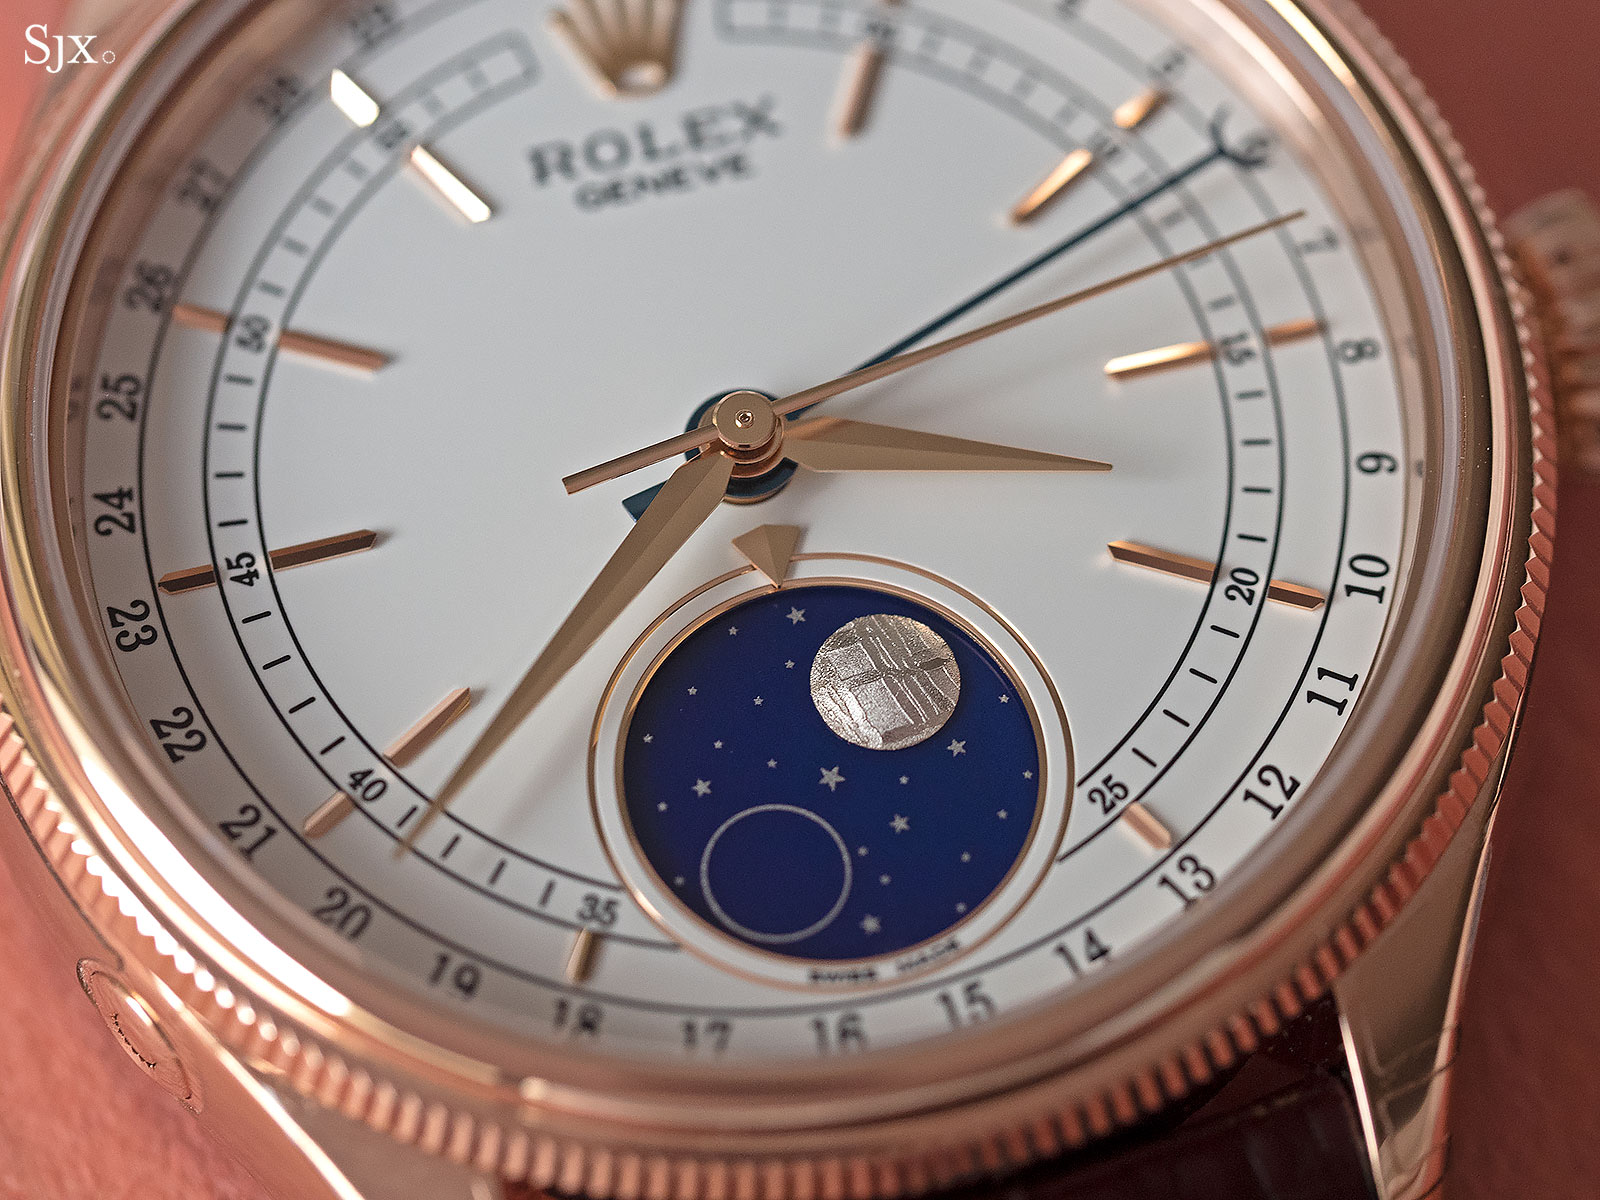 Rolex Cellini Moonphase 50535 review 11